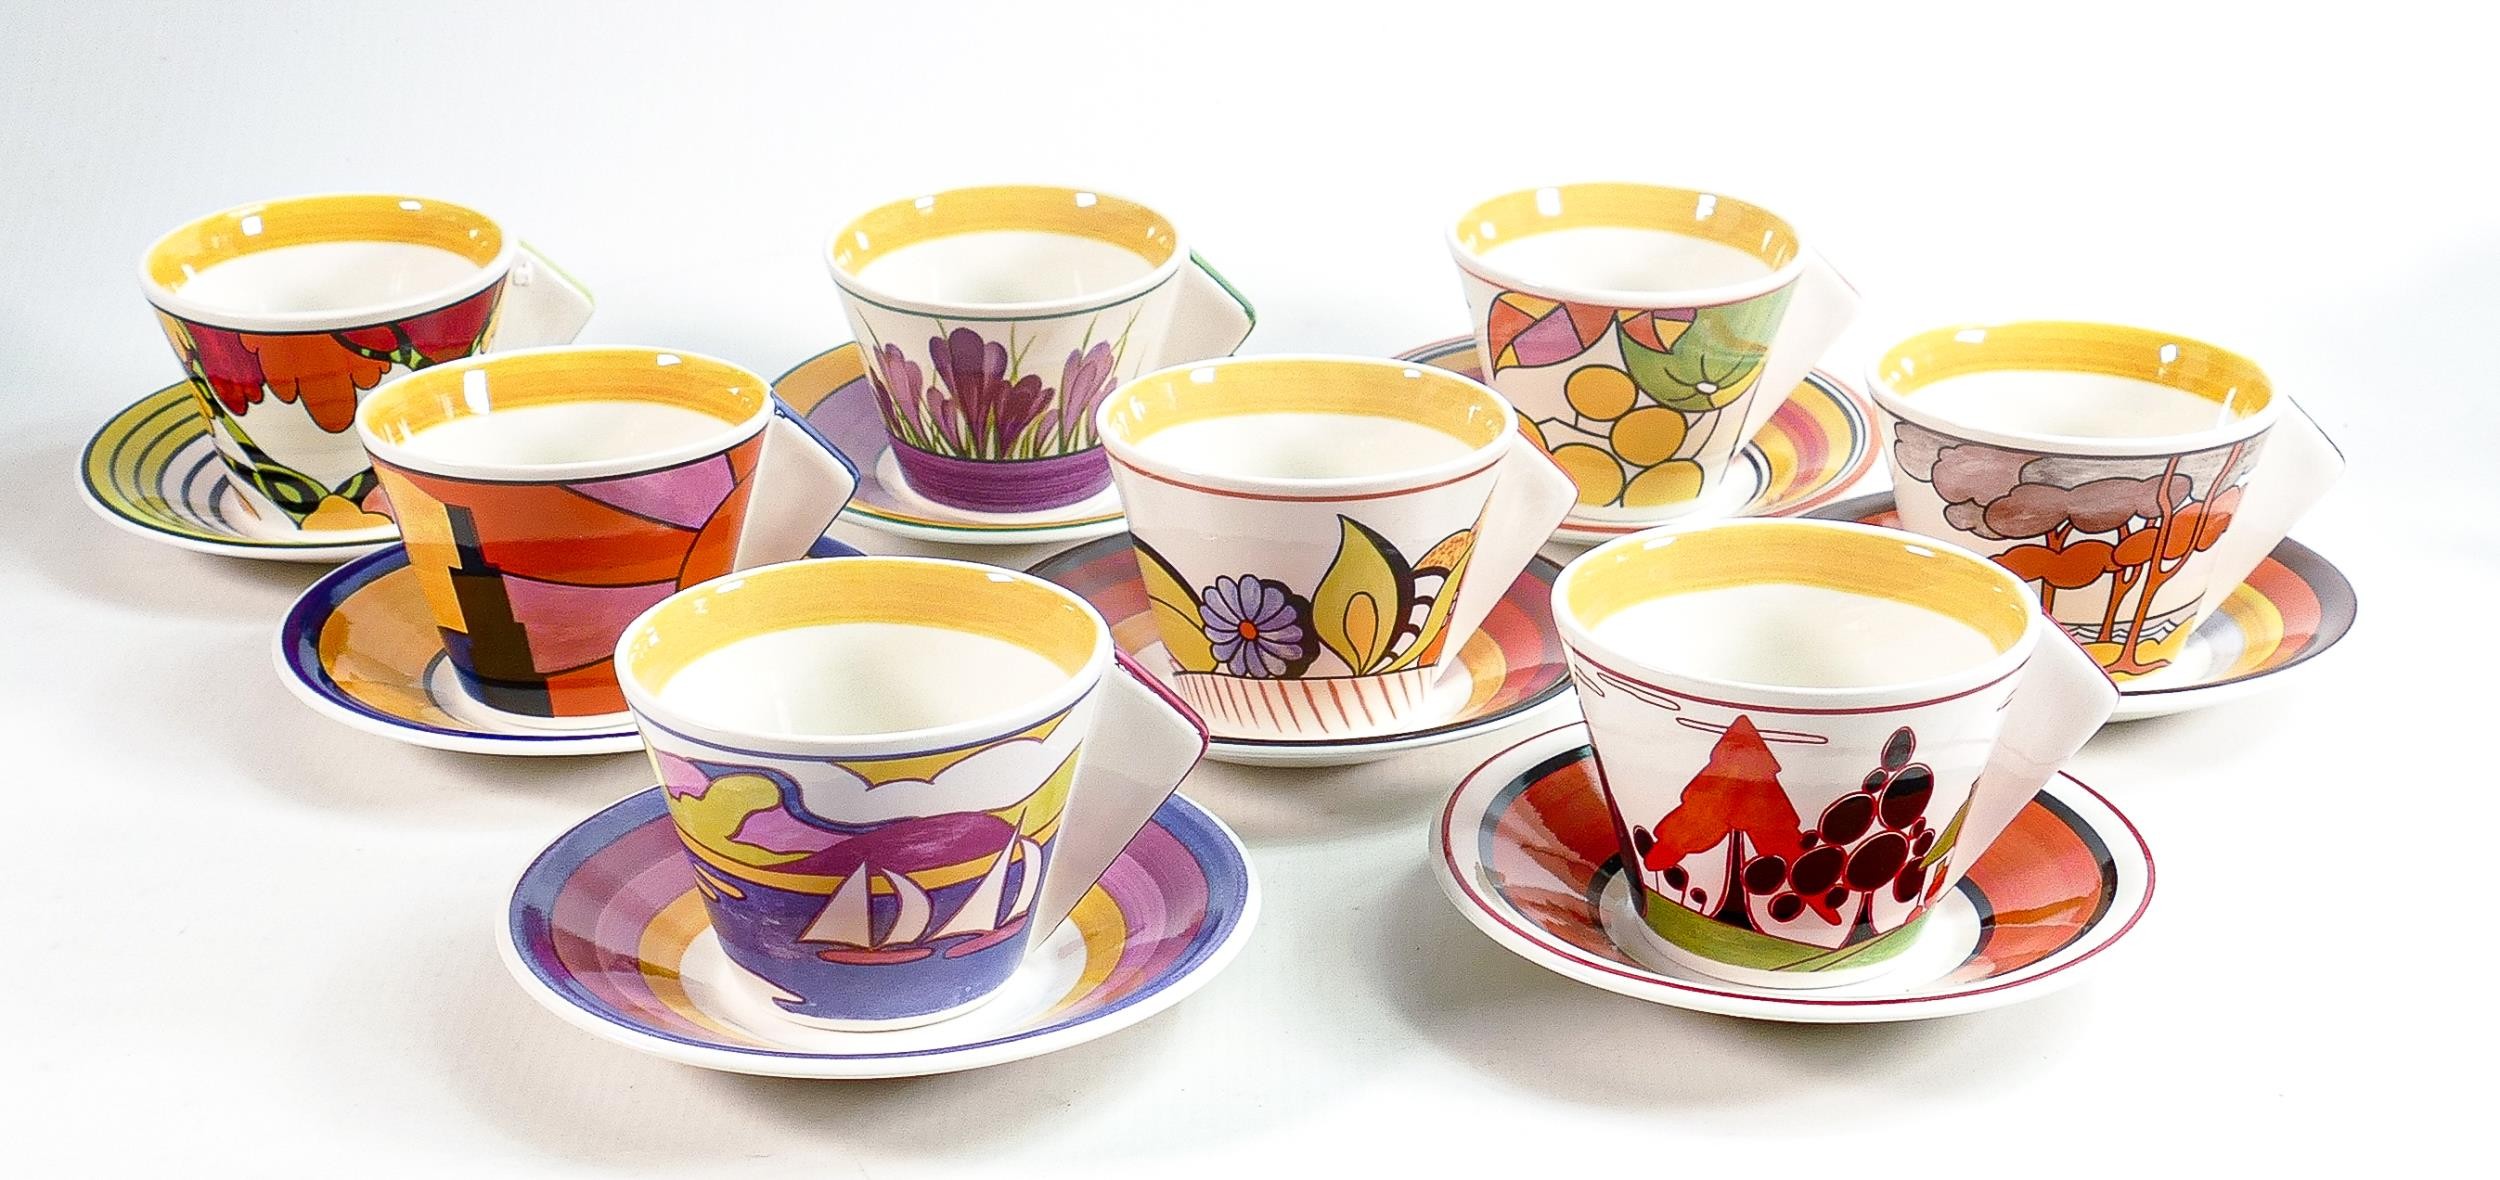 Wedgwood Clarice Cliff Centenary cups & saucers in Trees & House, Honolulu, Lilac Crocus, Devon,